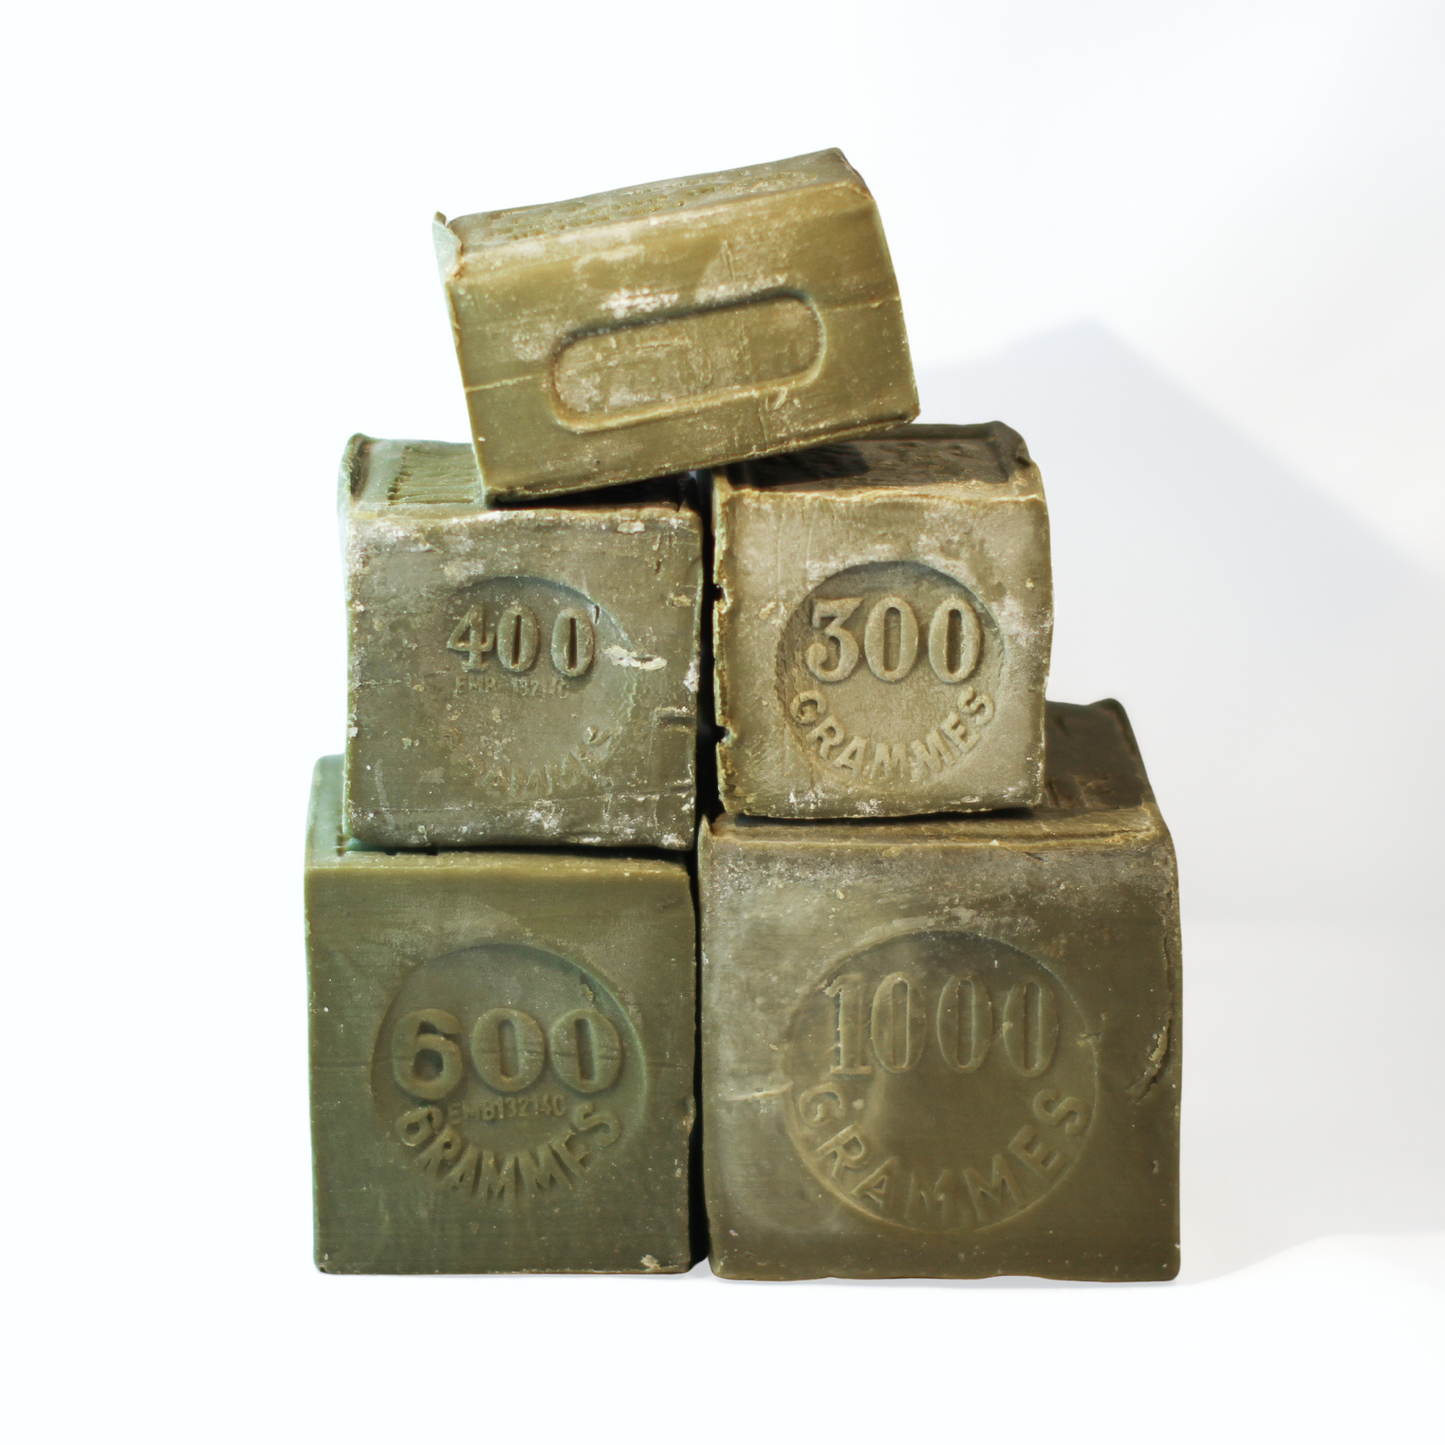 MARSEILLE OLIVE SOAP